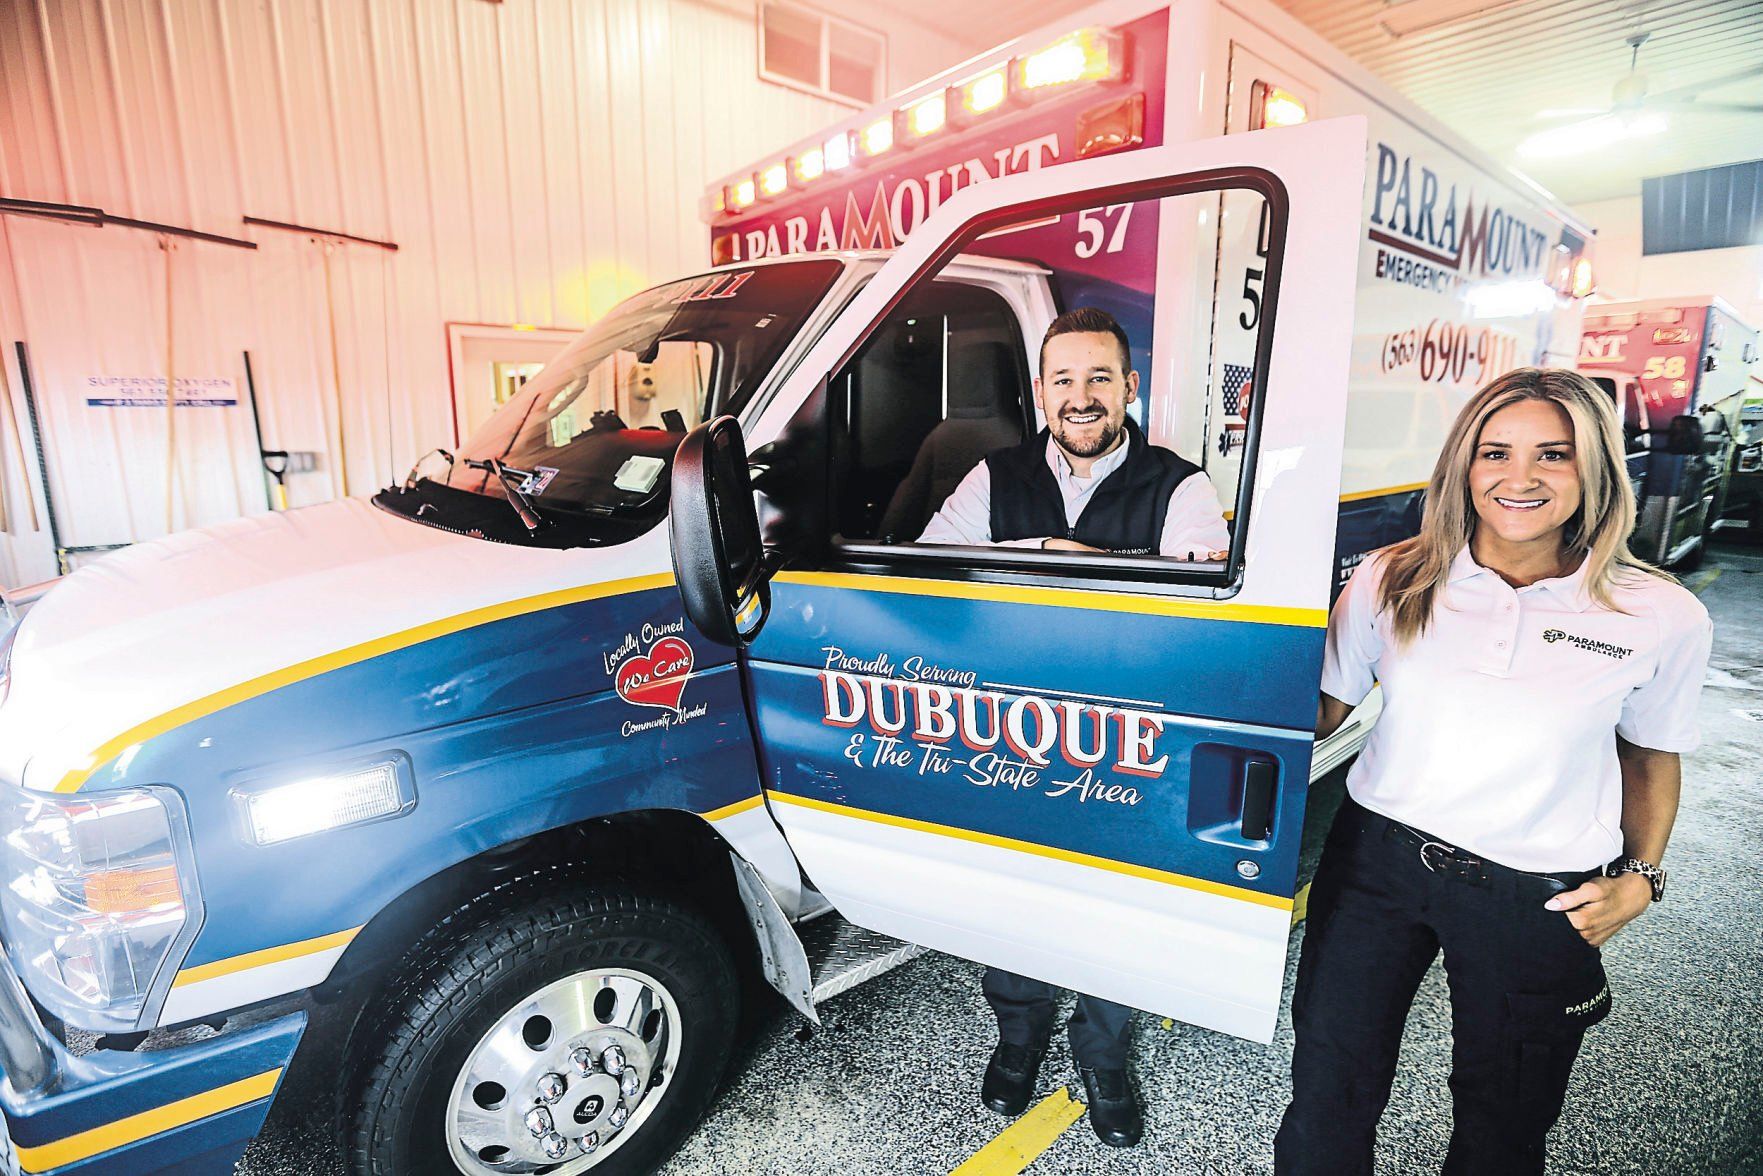 Andy Ney and his sister, Alicia Ludescher, have taken on leadership roles at Paramount Ambulance in Dubuque. Their parents, Marvin and Maria Ney, started the service in 2003. The company and the siblings have recently earned awards.    PHOTO CREDIT: Dave Kettering